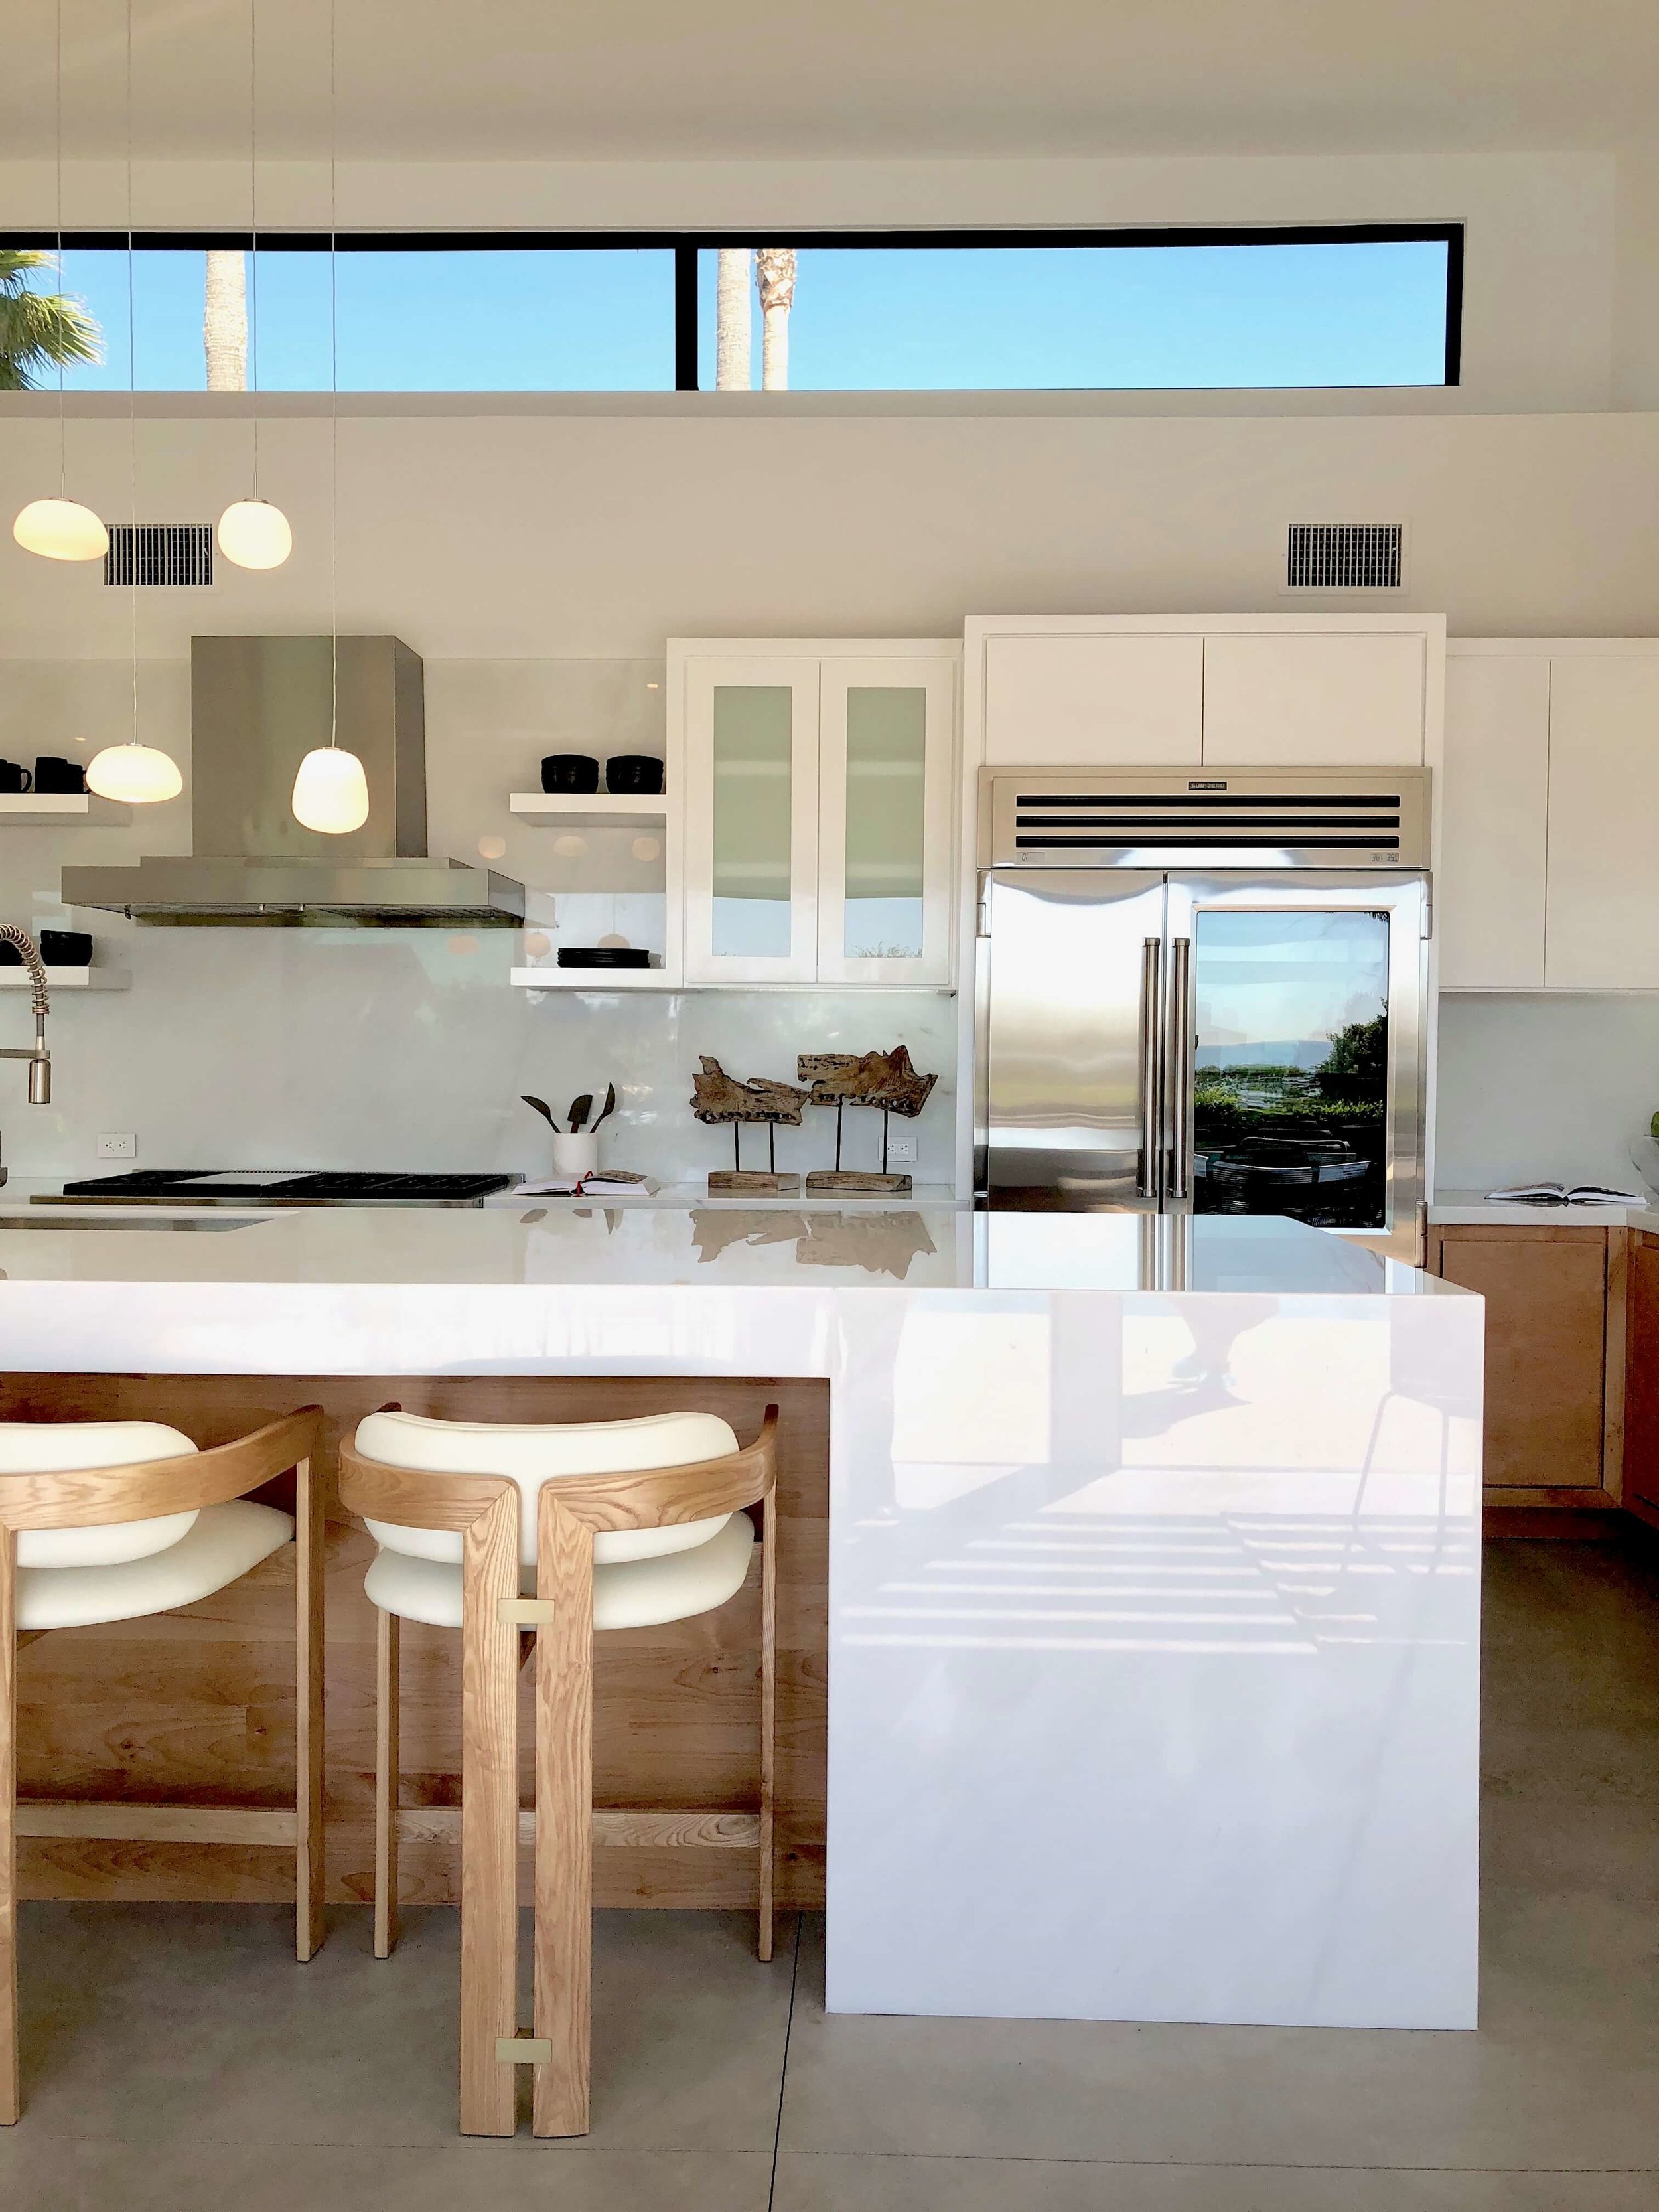 California Contemporary - Dwell On Design's Fall Home Tours, Part 1